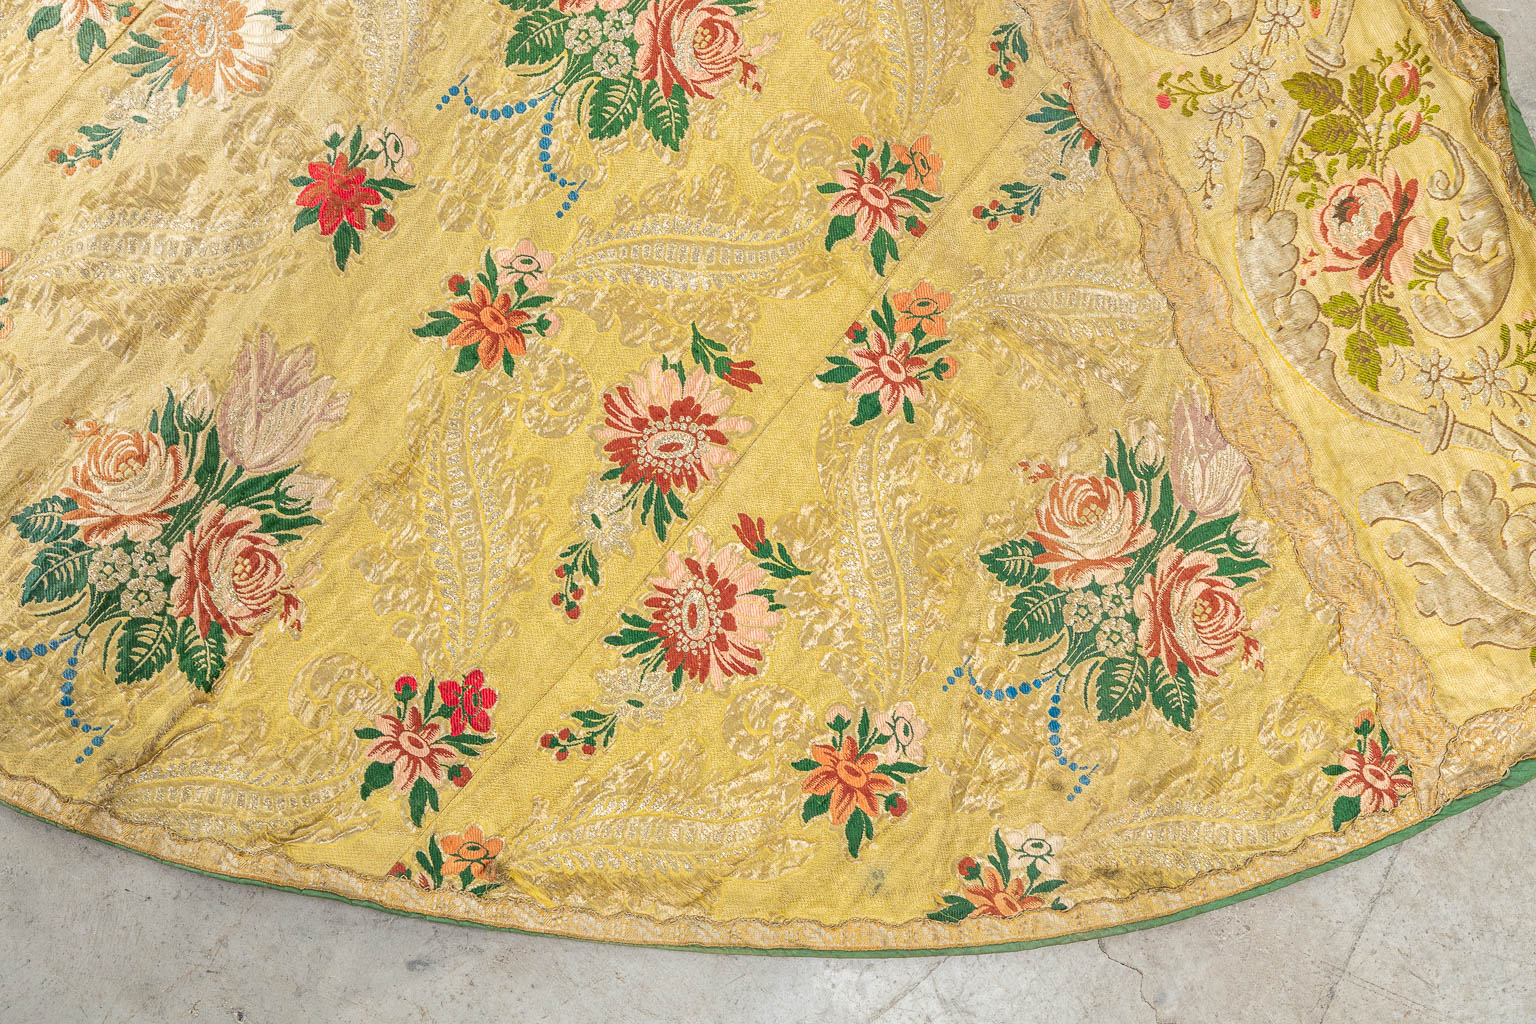 A Cope decorated with a white dove and flowers, made of gold thread. (H:128cm)